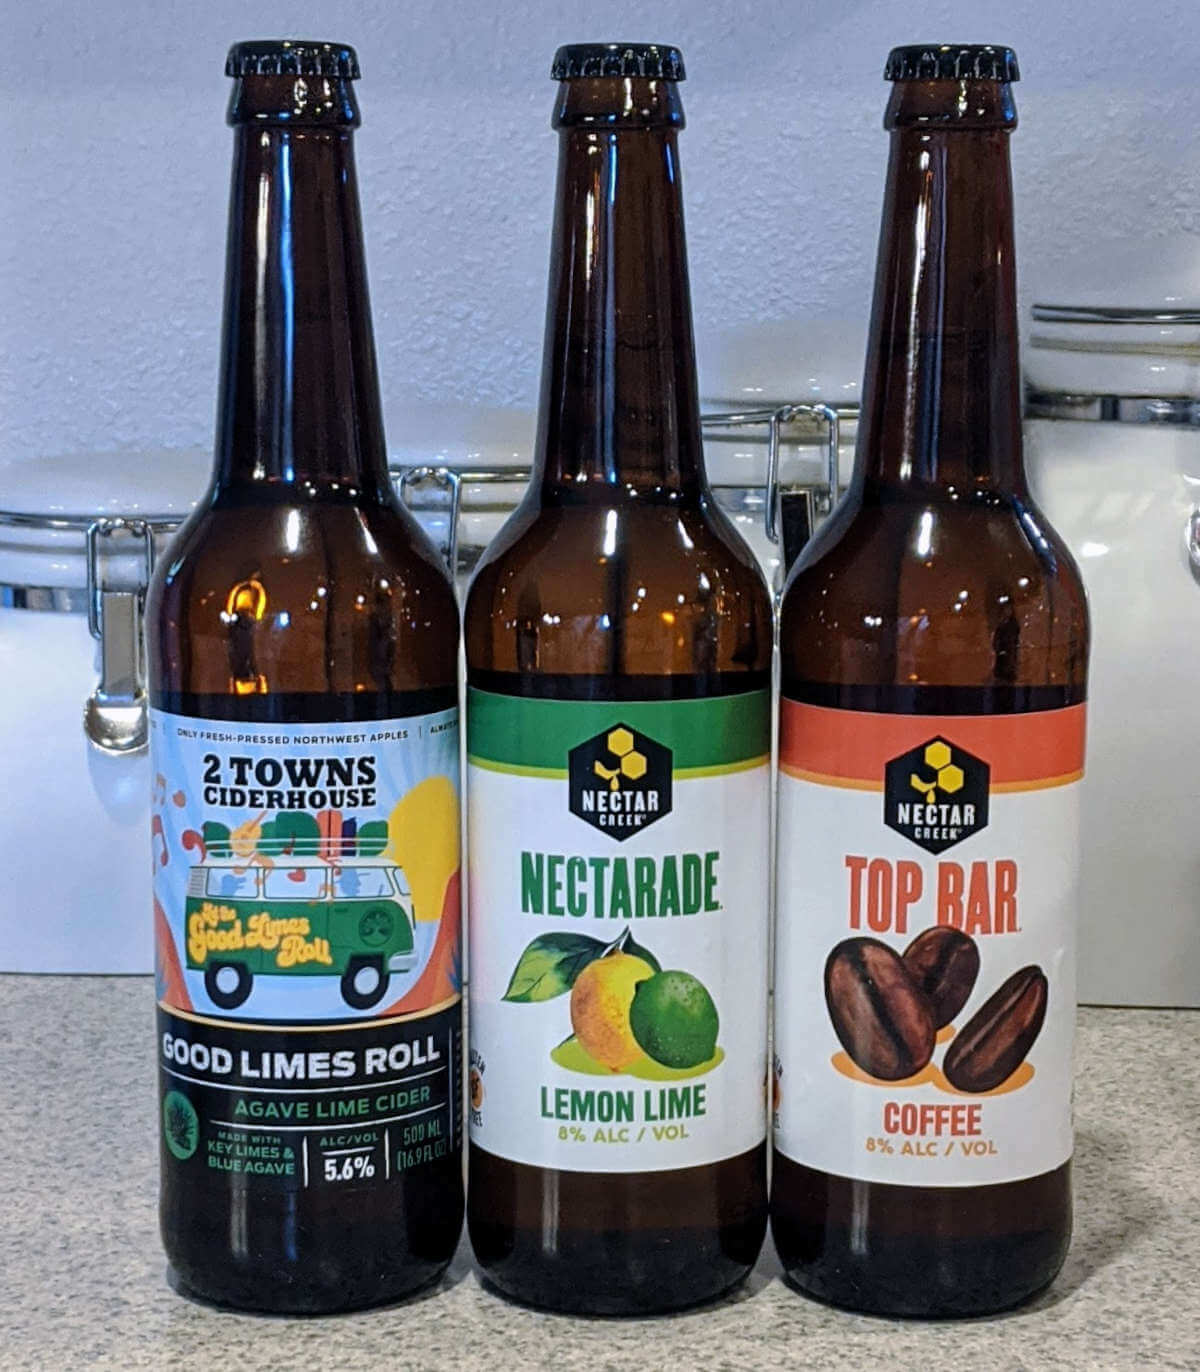 The return of Nectar Creek Mead with Nectarade and Top Bar (reviews)